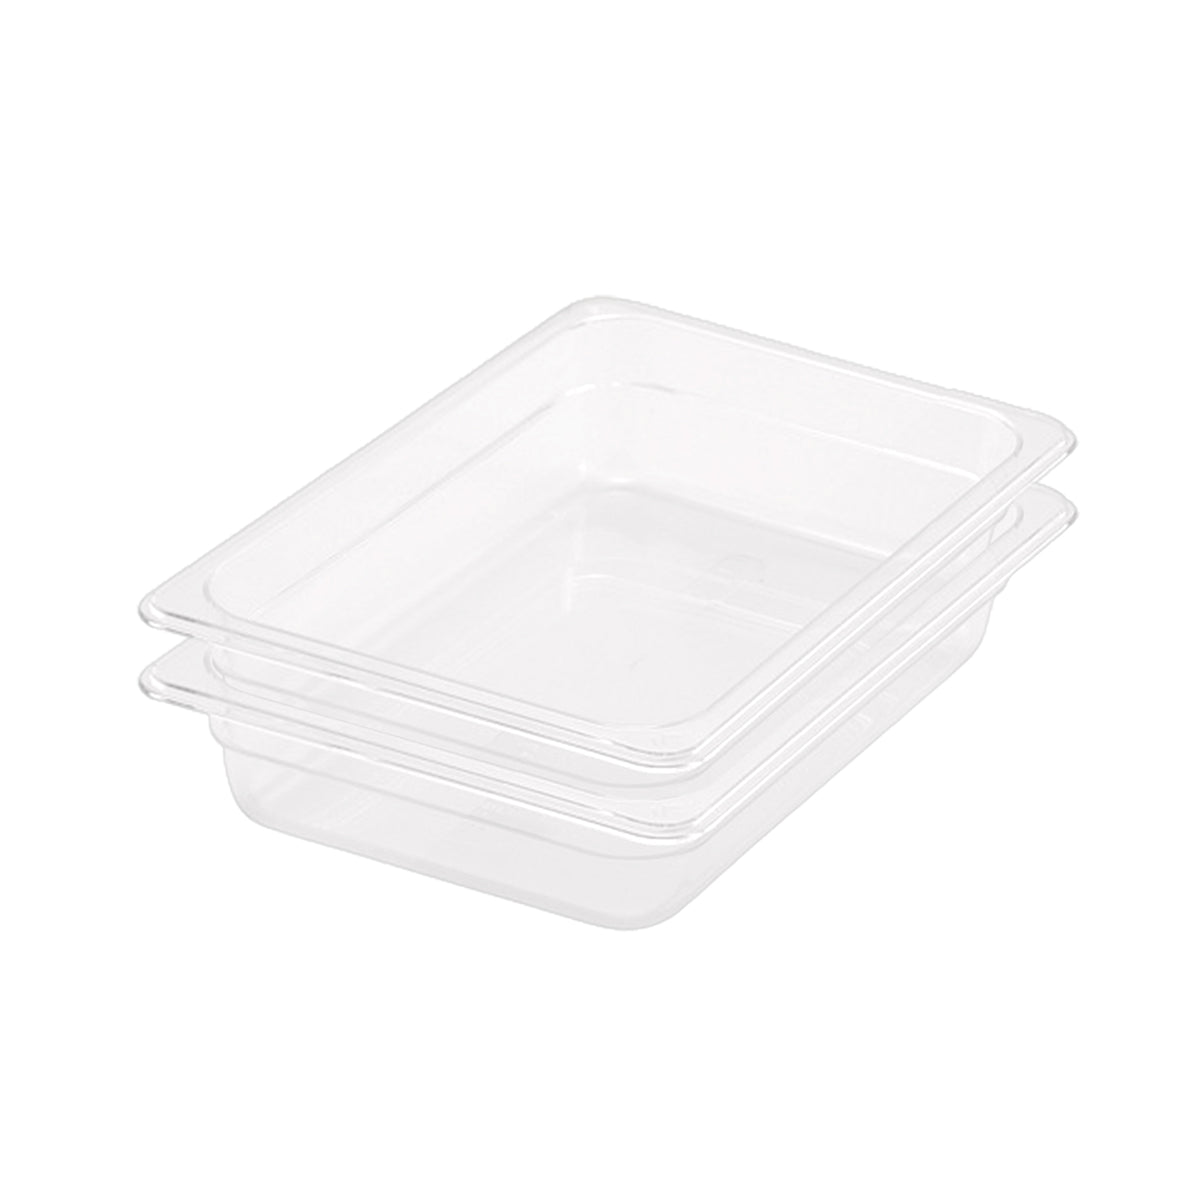 SOGA 65mm Clear Gastronorm GN Pan 1/2 Food Tray Storage Bundle of 2